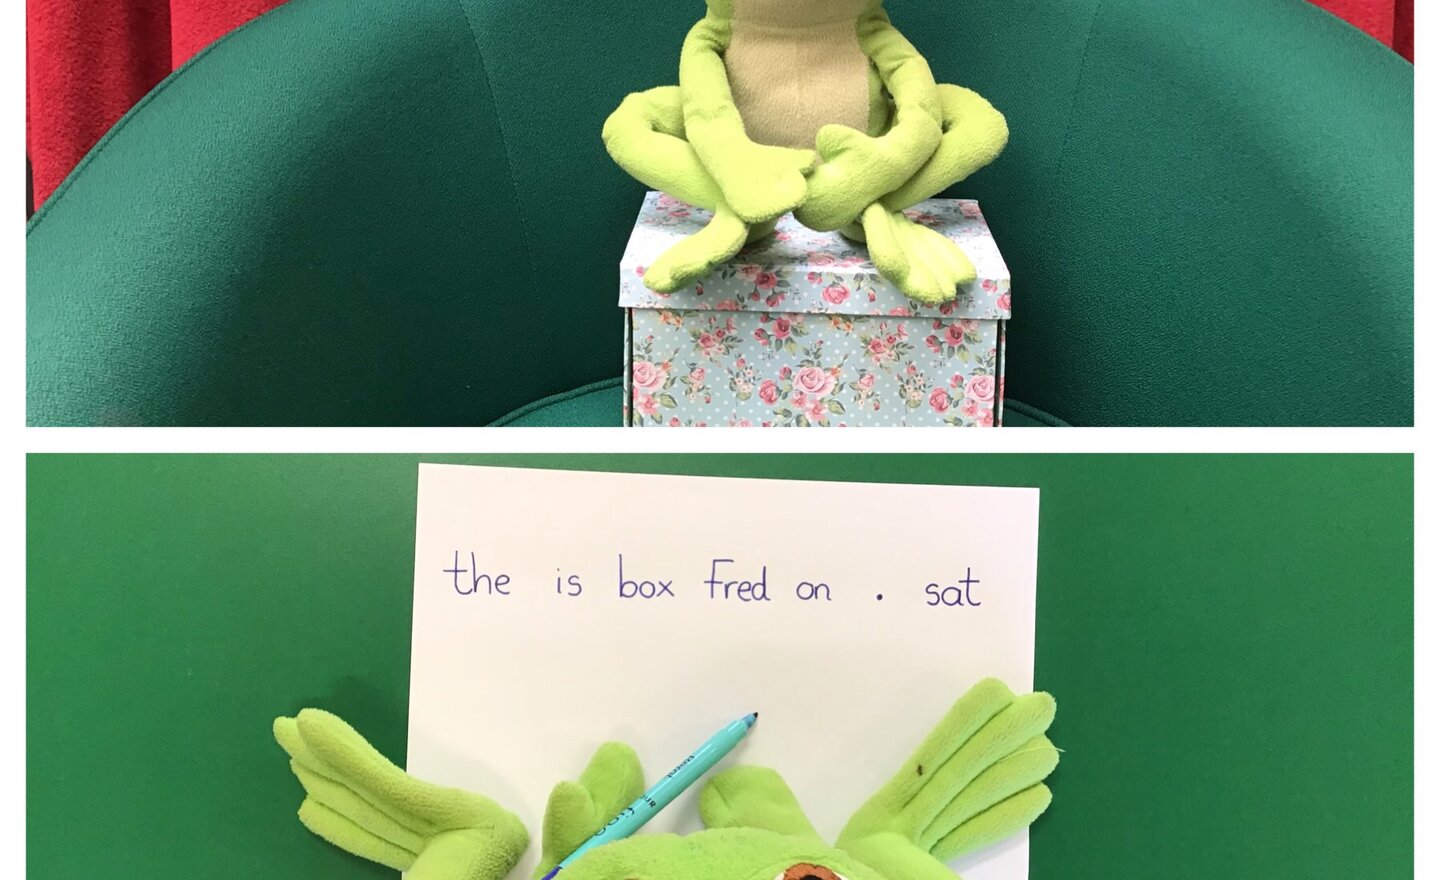 Image of Fred the Frog - Jumbled Sentence